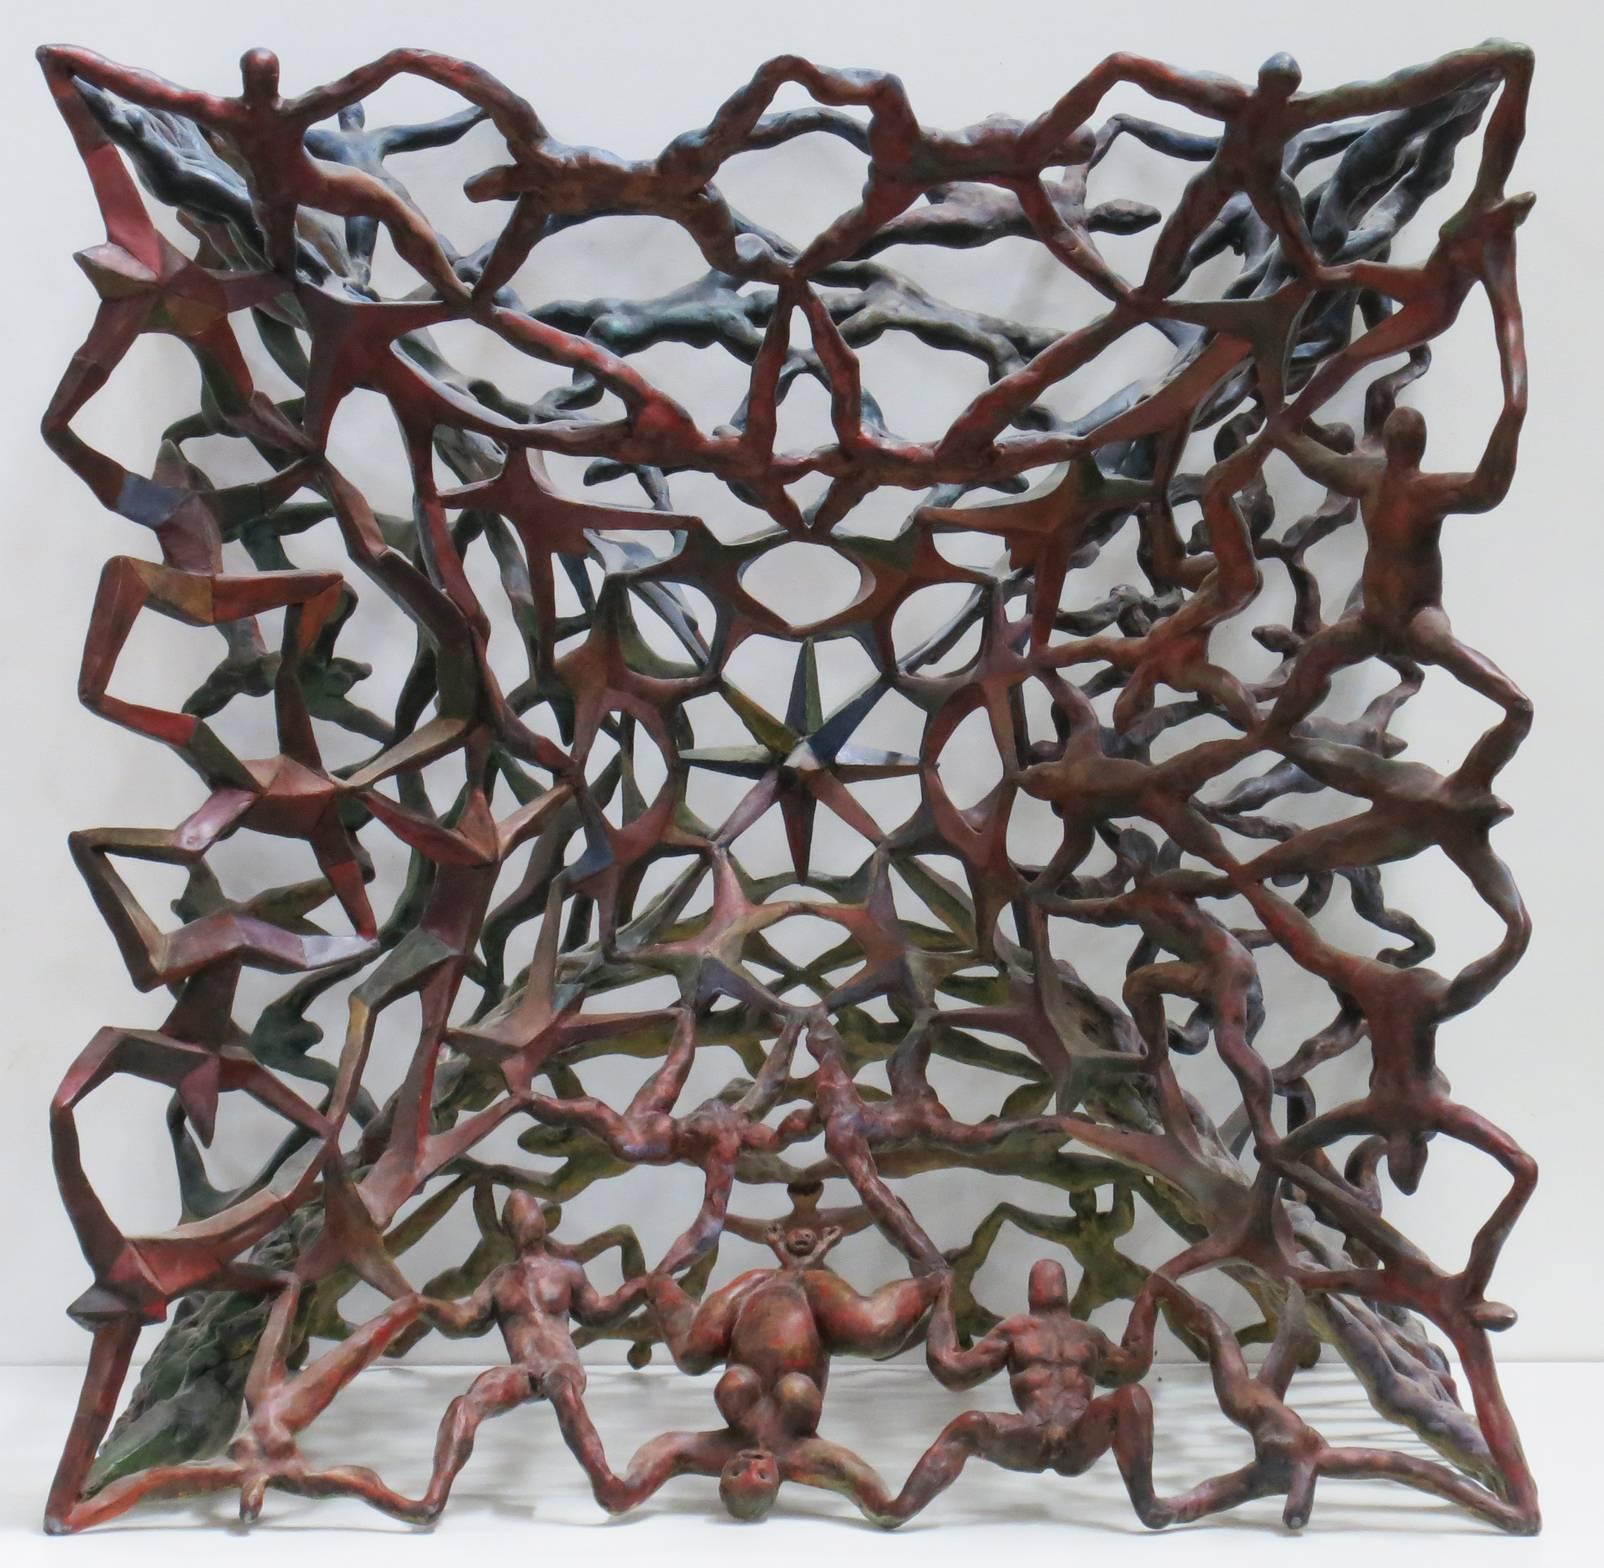 "Little Universe", cubic sculpture of linked figures, in deep bronzes and blues - Sculpture by Howard Kalish